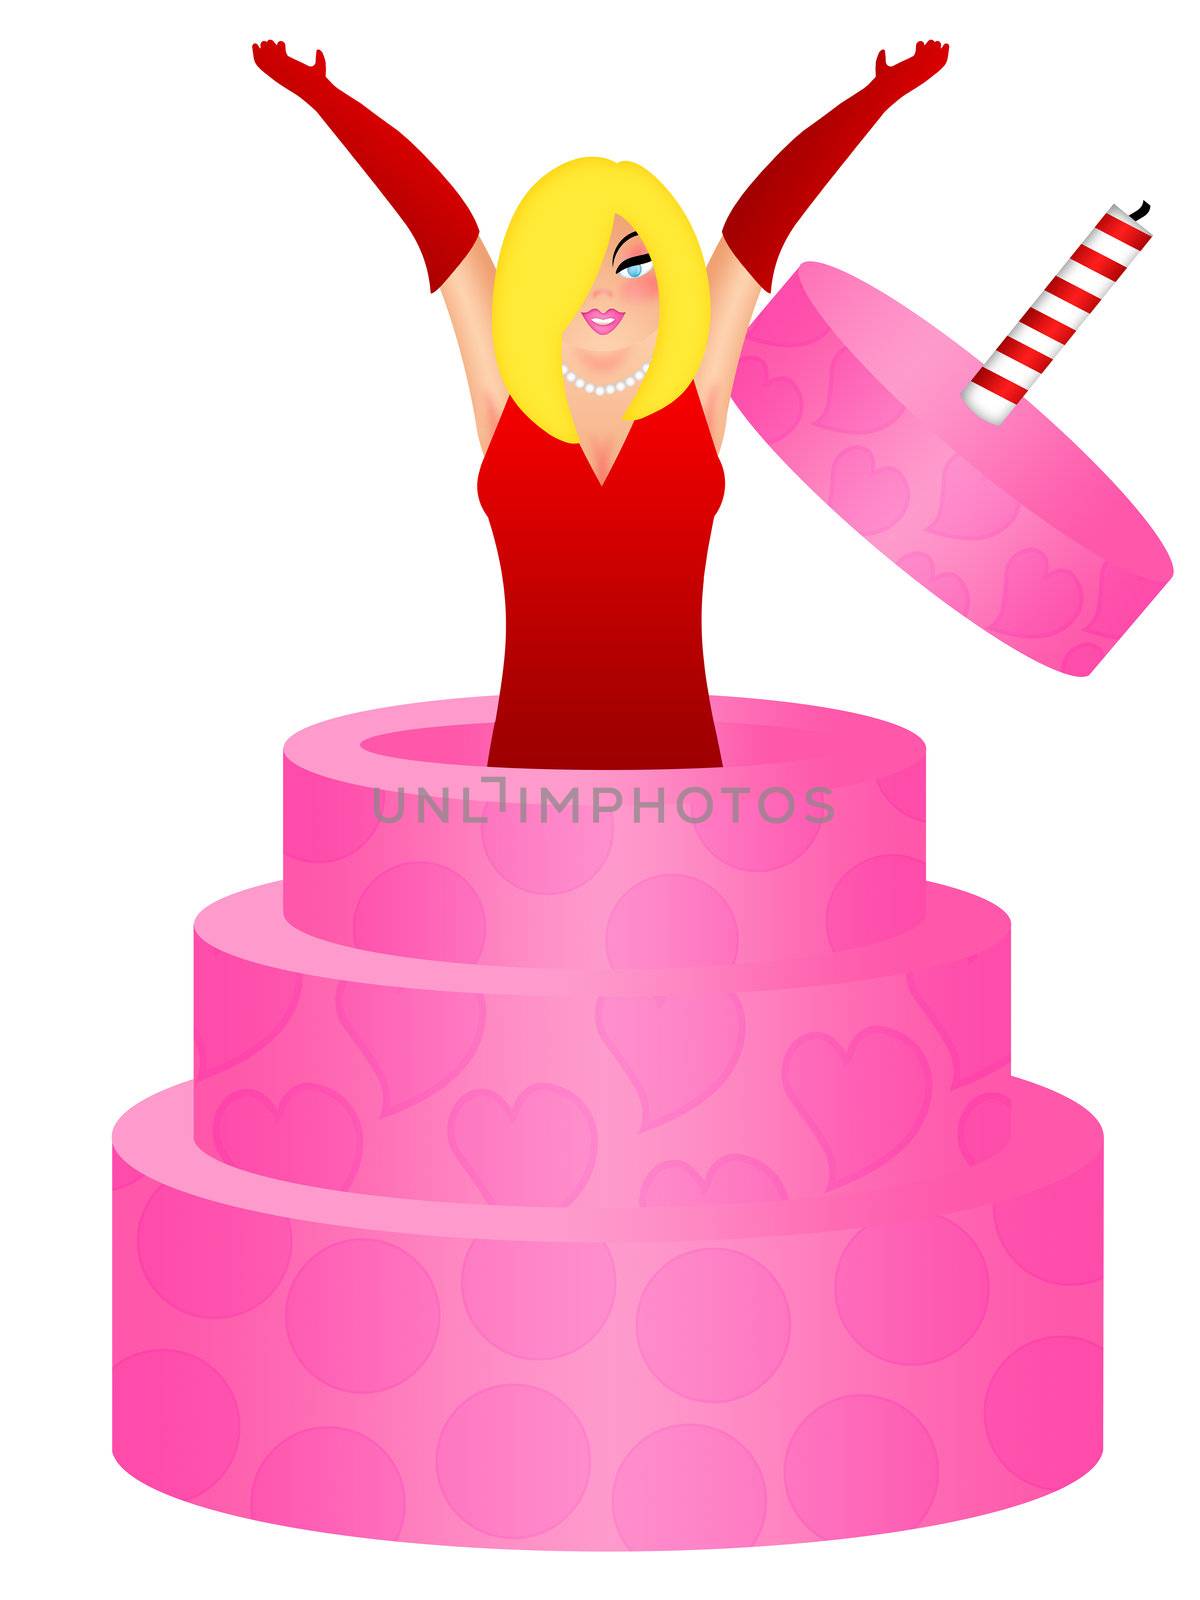 Sexy Blonde Woman Jumping Out of Birthday Cake Illustration by jpldesigns